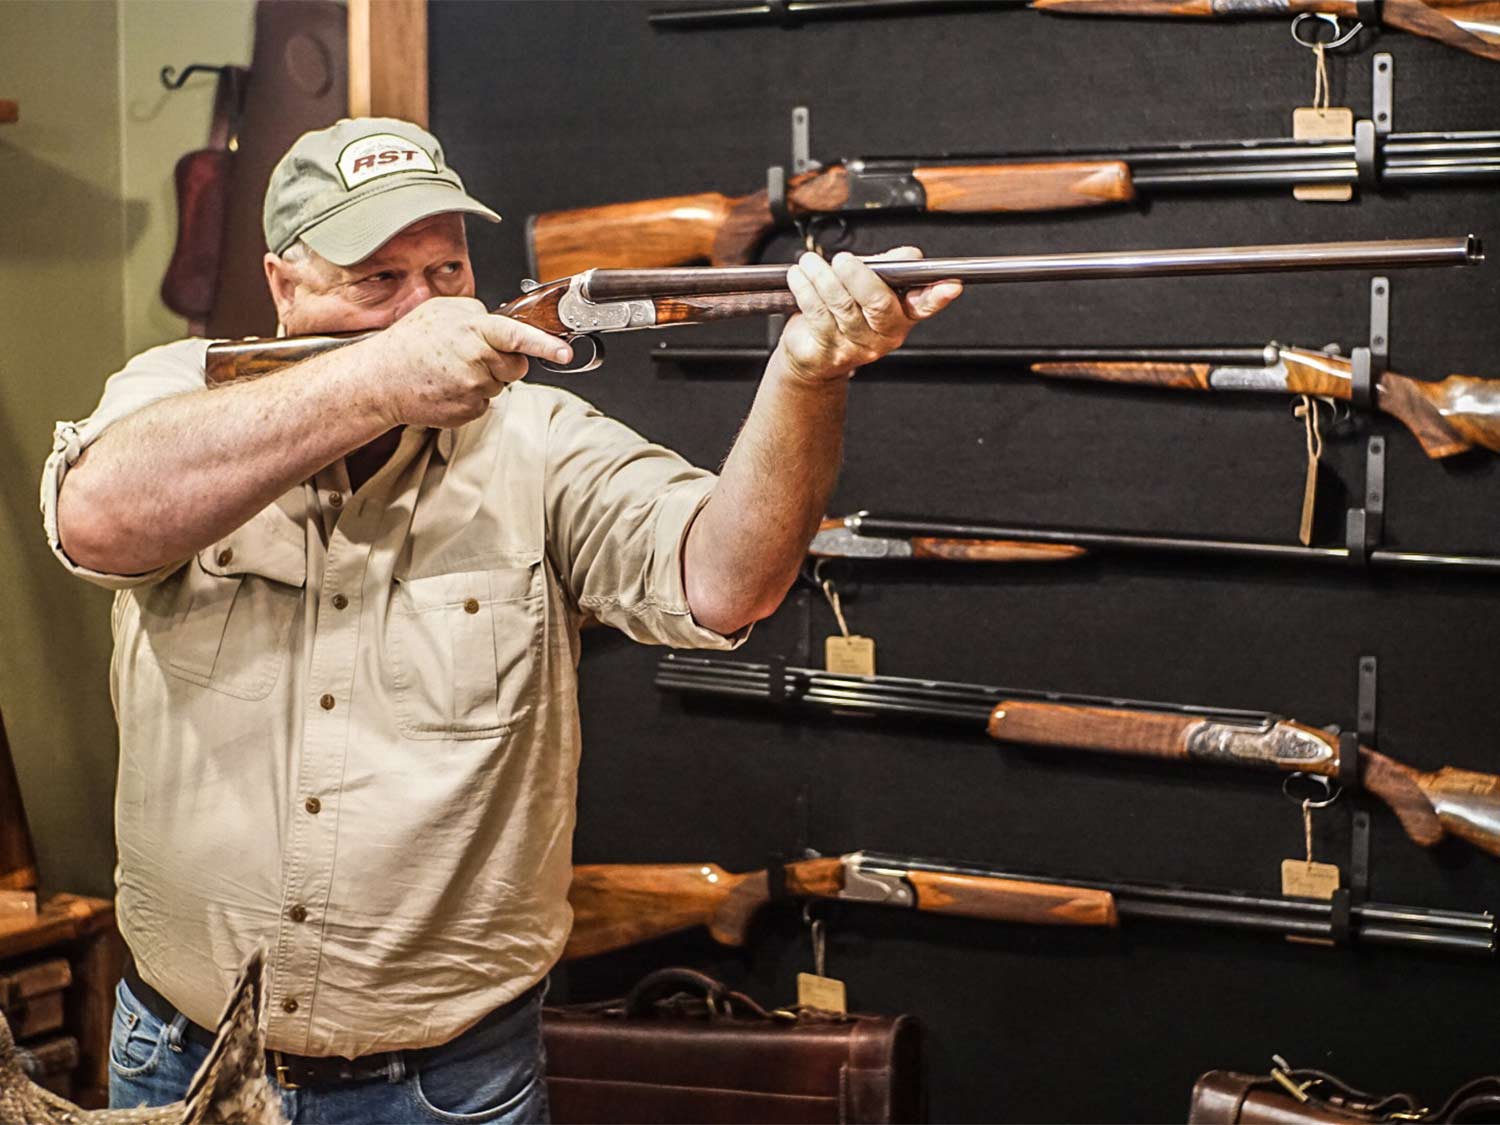 A man holds up a shotgun in a store.